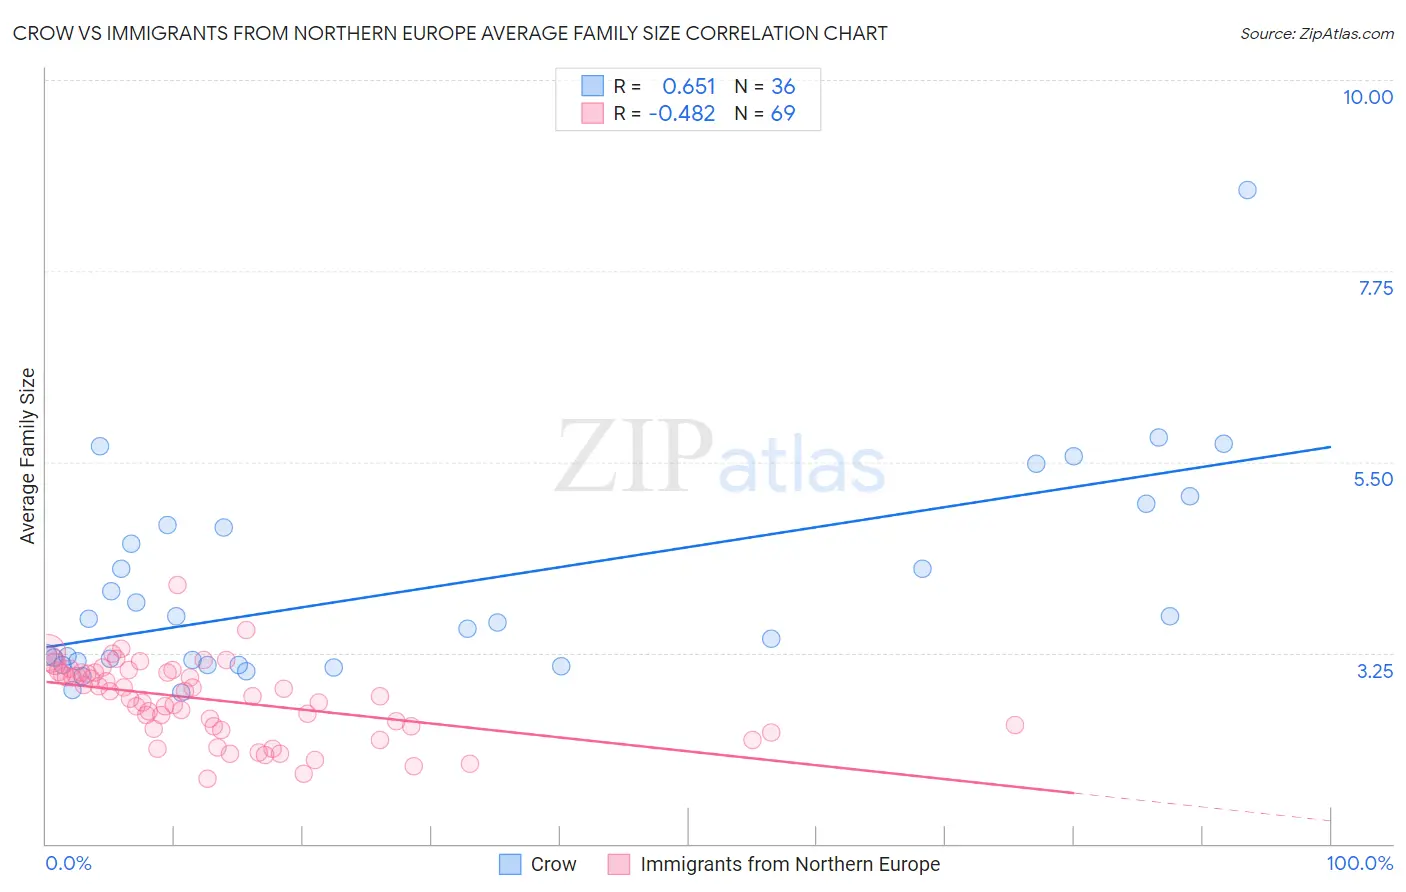 Crow vs Immigrants from Northern Europe Average Family Size